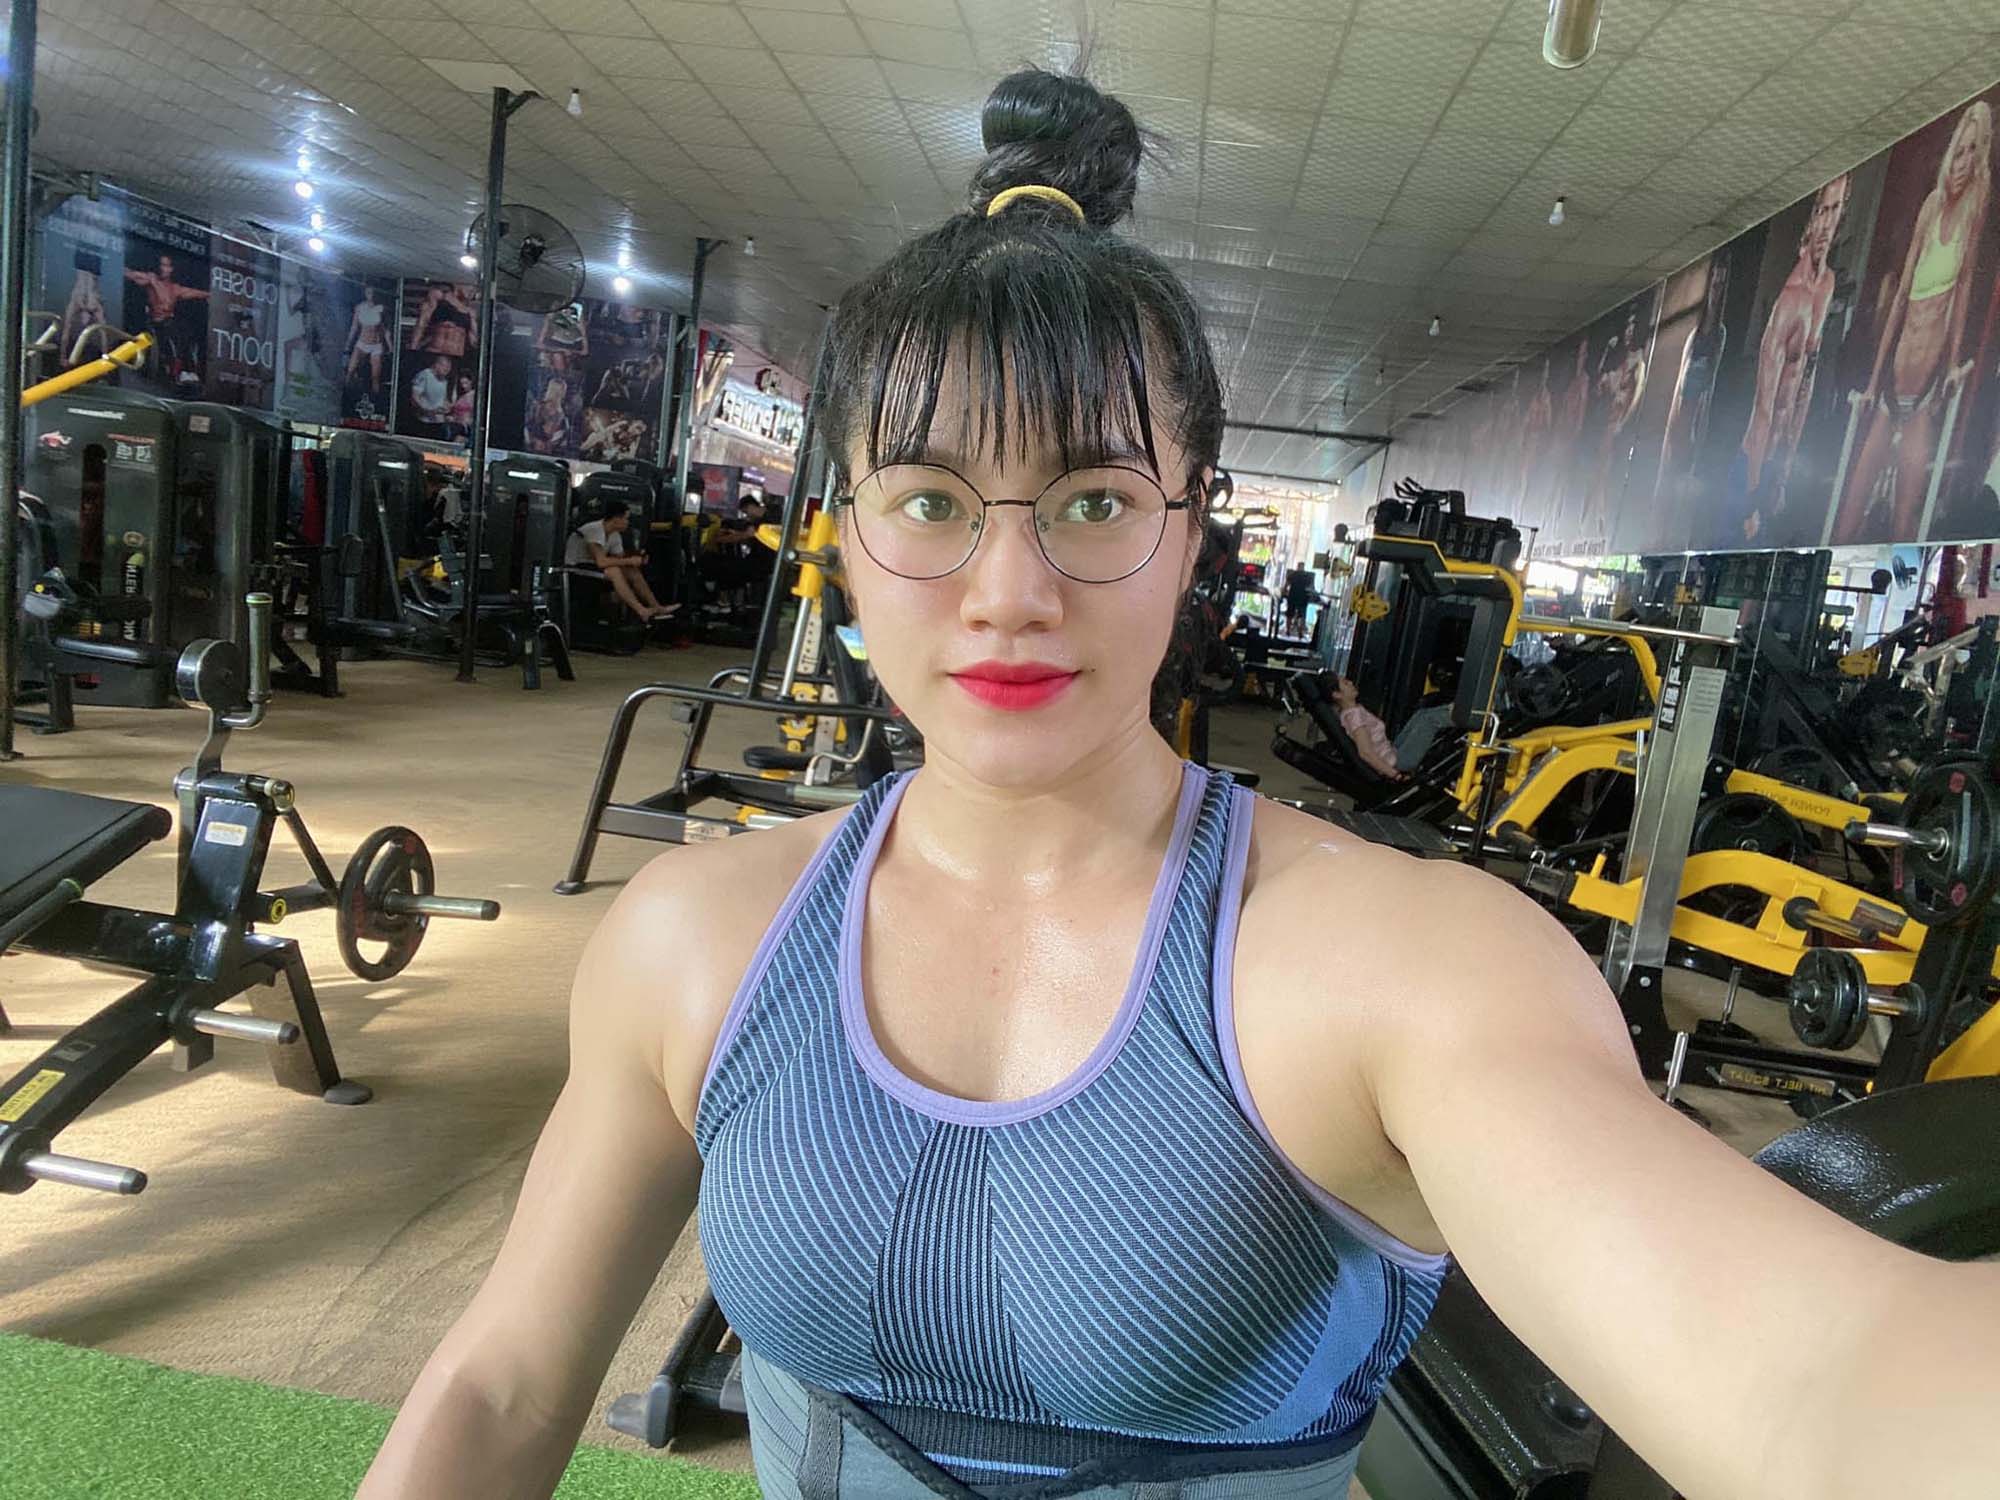 Read more about the article Vietnamese Bodybuilder Nicknamed Muscle Barbie Shuns Stereotypes